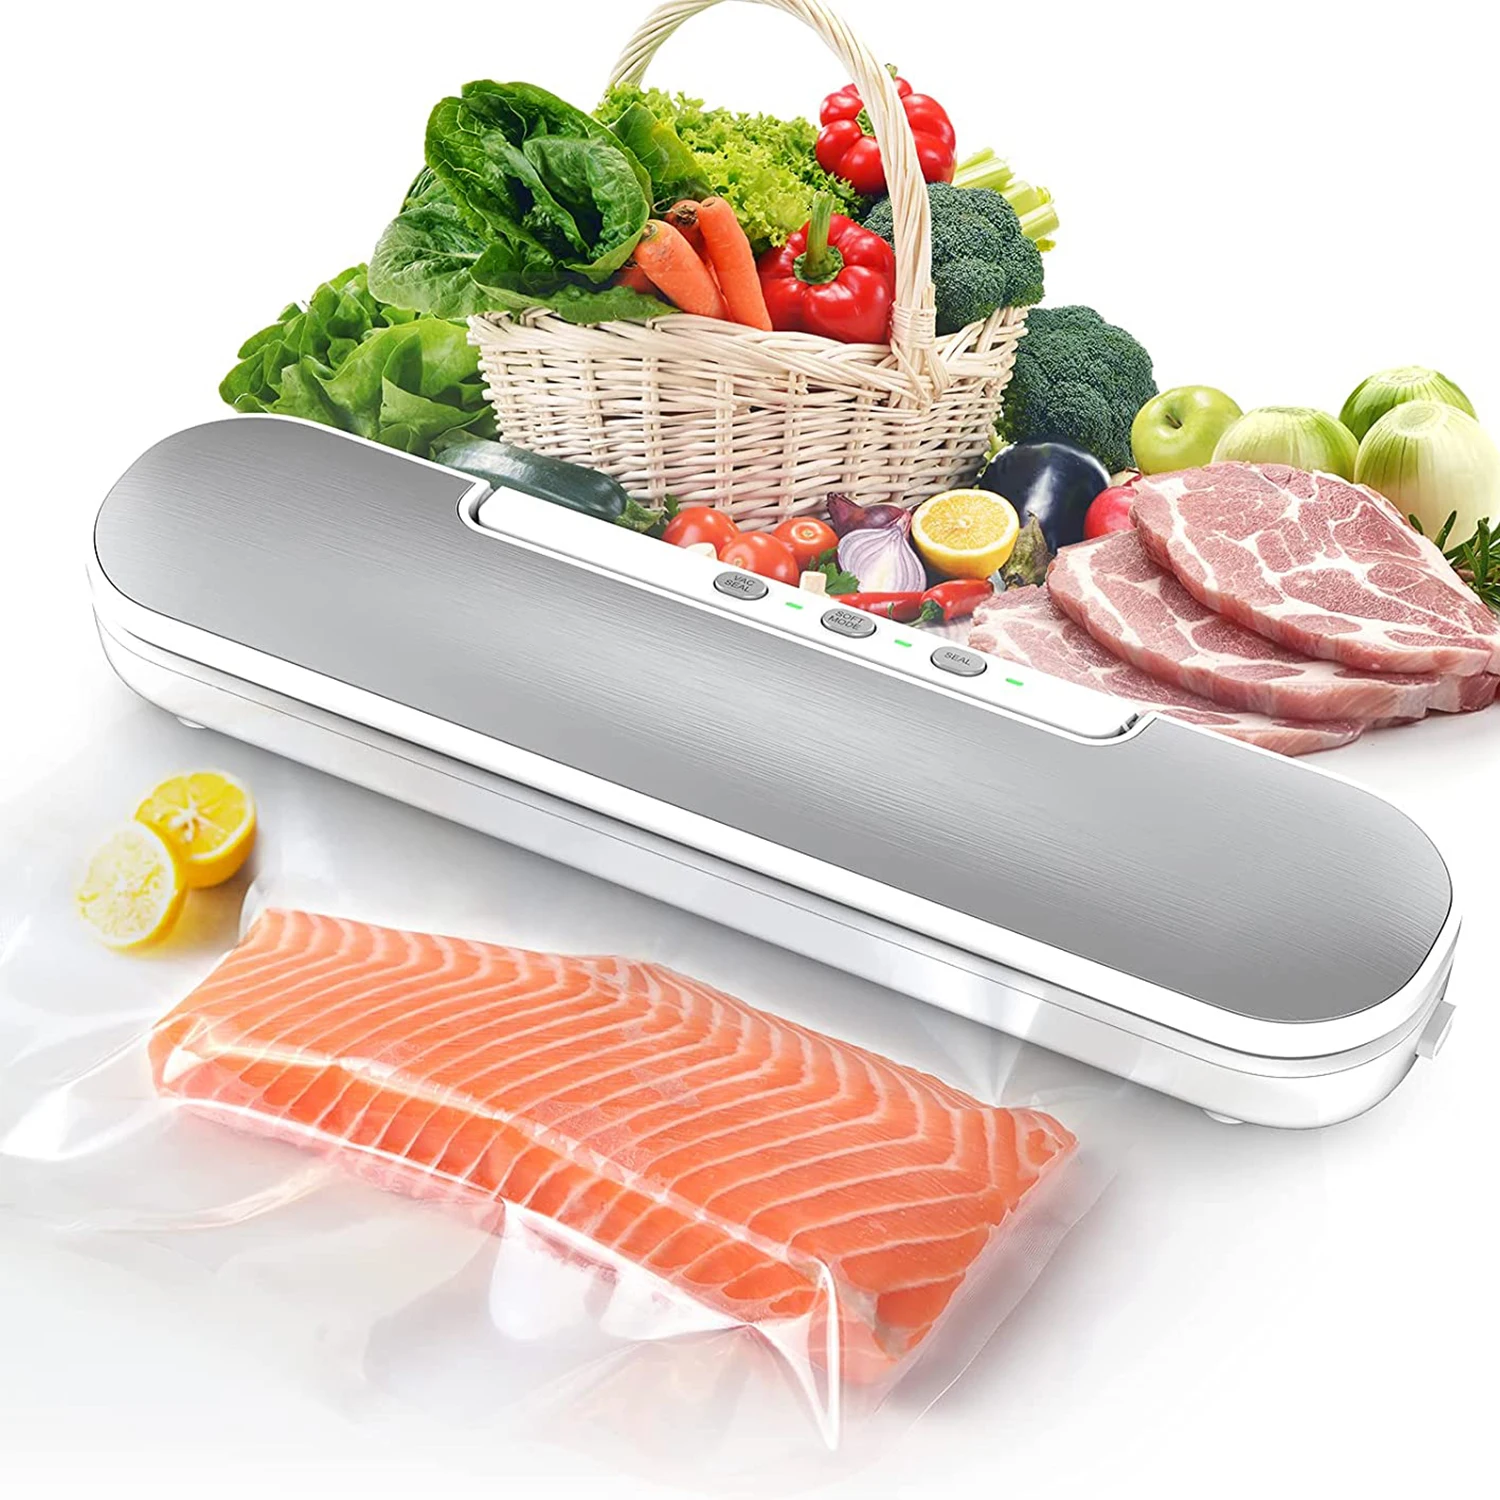 Best Food Vacuum Sealer 220V/110V Automatic Commercial Household Food Vacuum Sealer Packaging Machine Include 15Pcs Bags